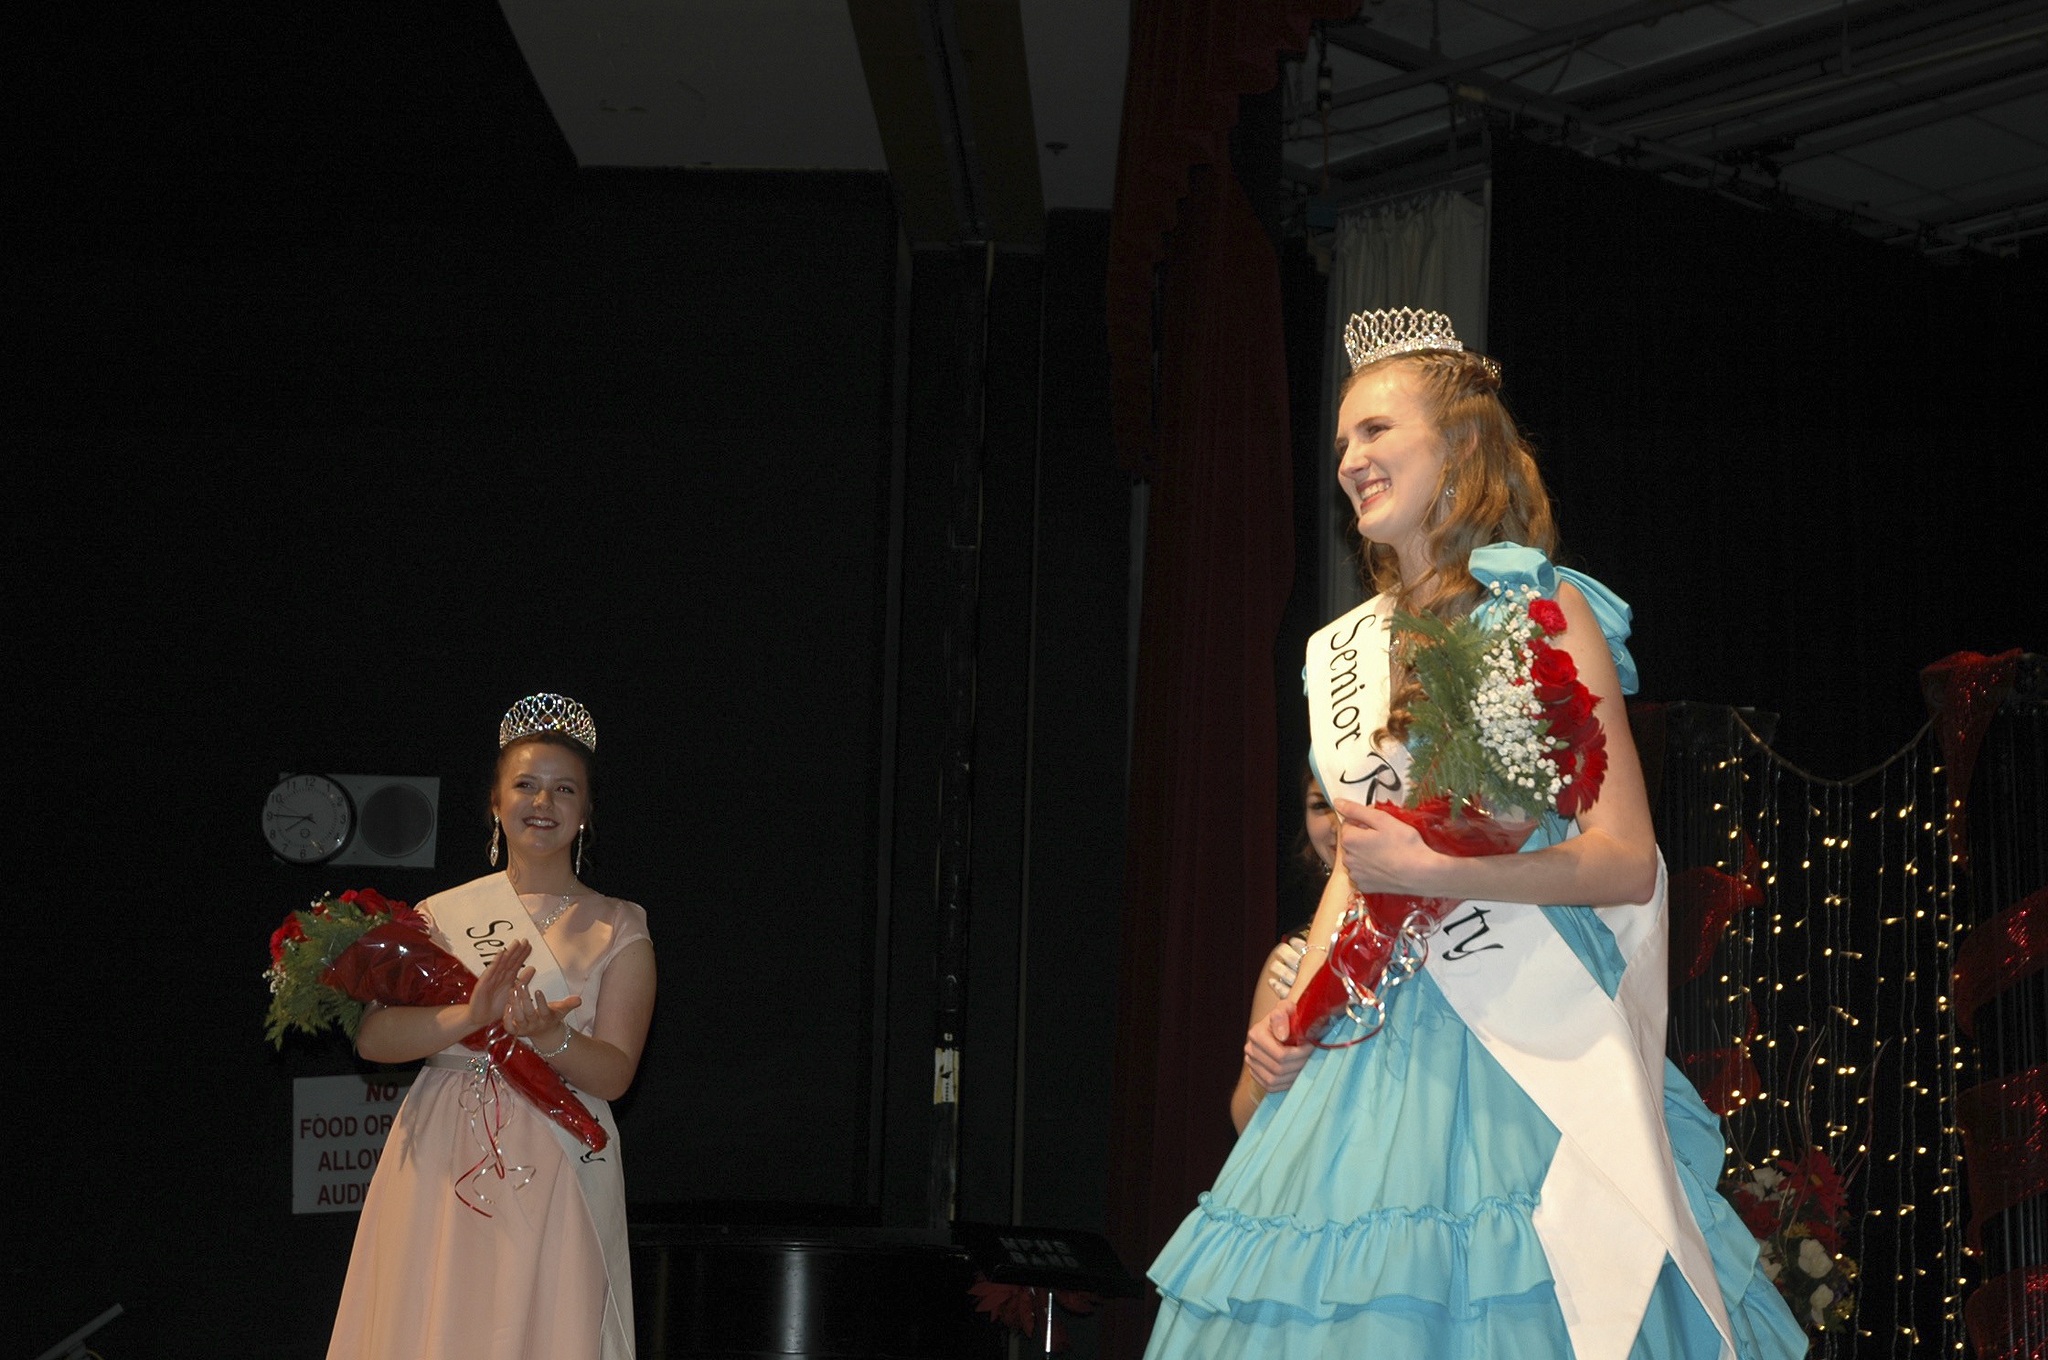 Strawberry Festival royalty crowned for 2017